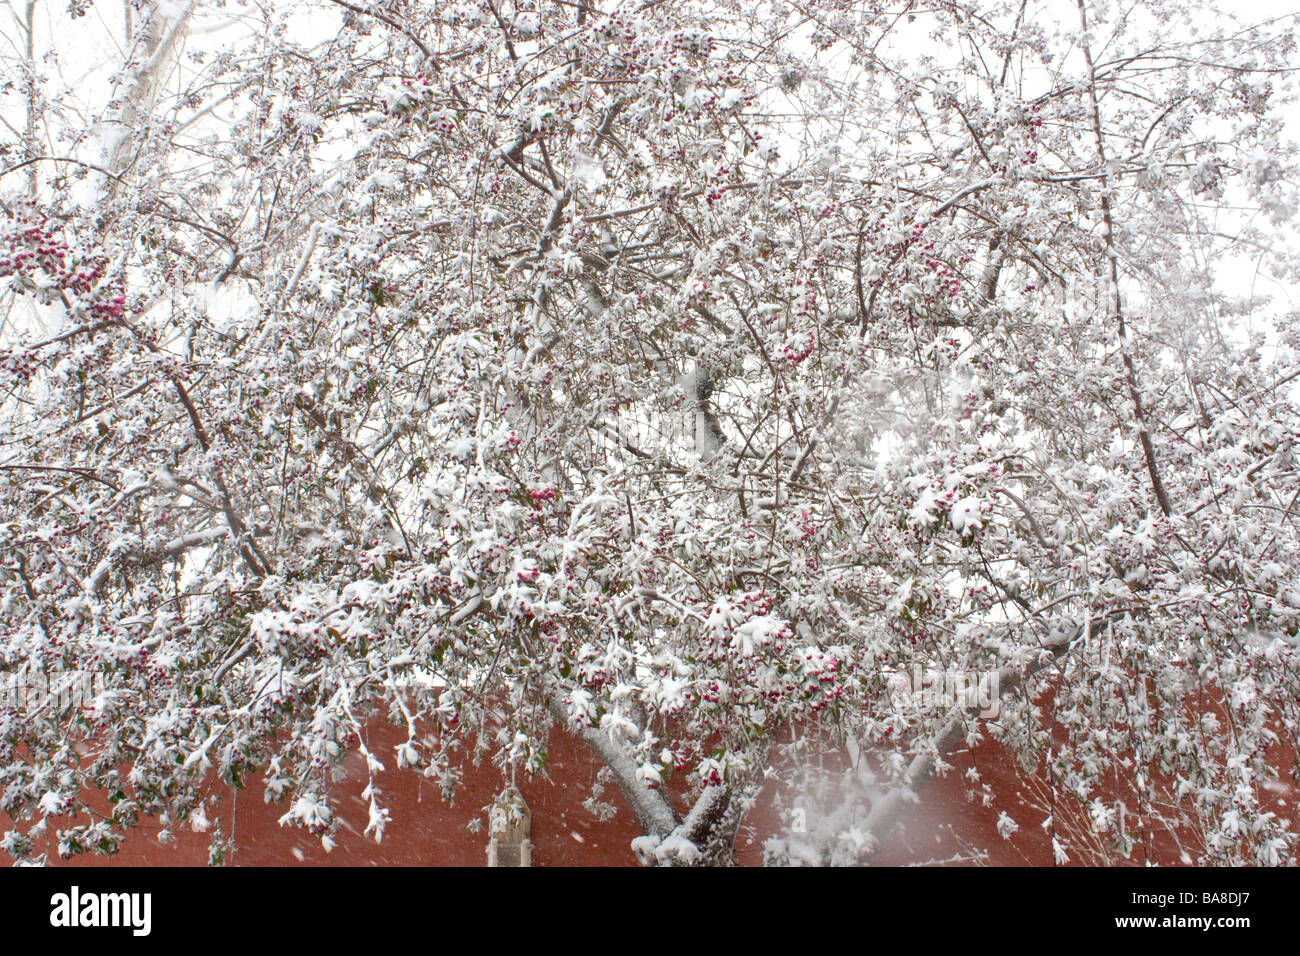 A blossoming Crabapple tree cover in snow Stock Photo